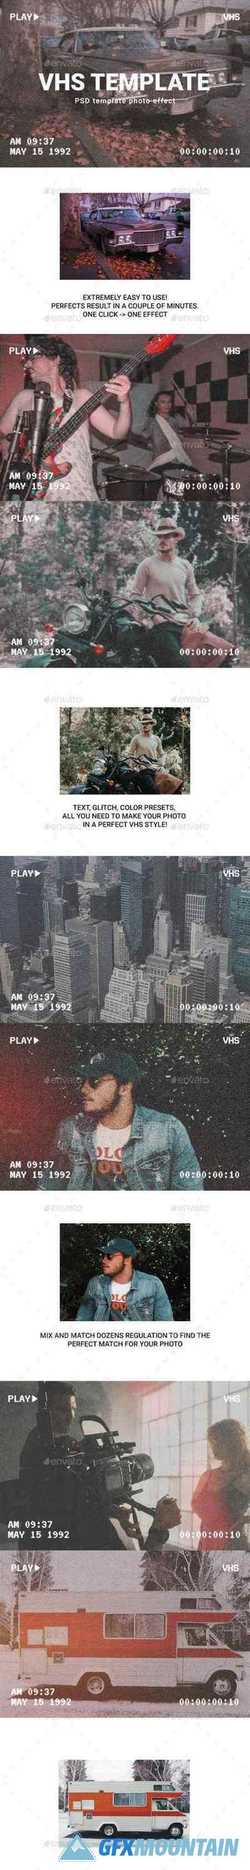 Vhs photo template 23025784